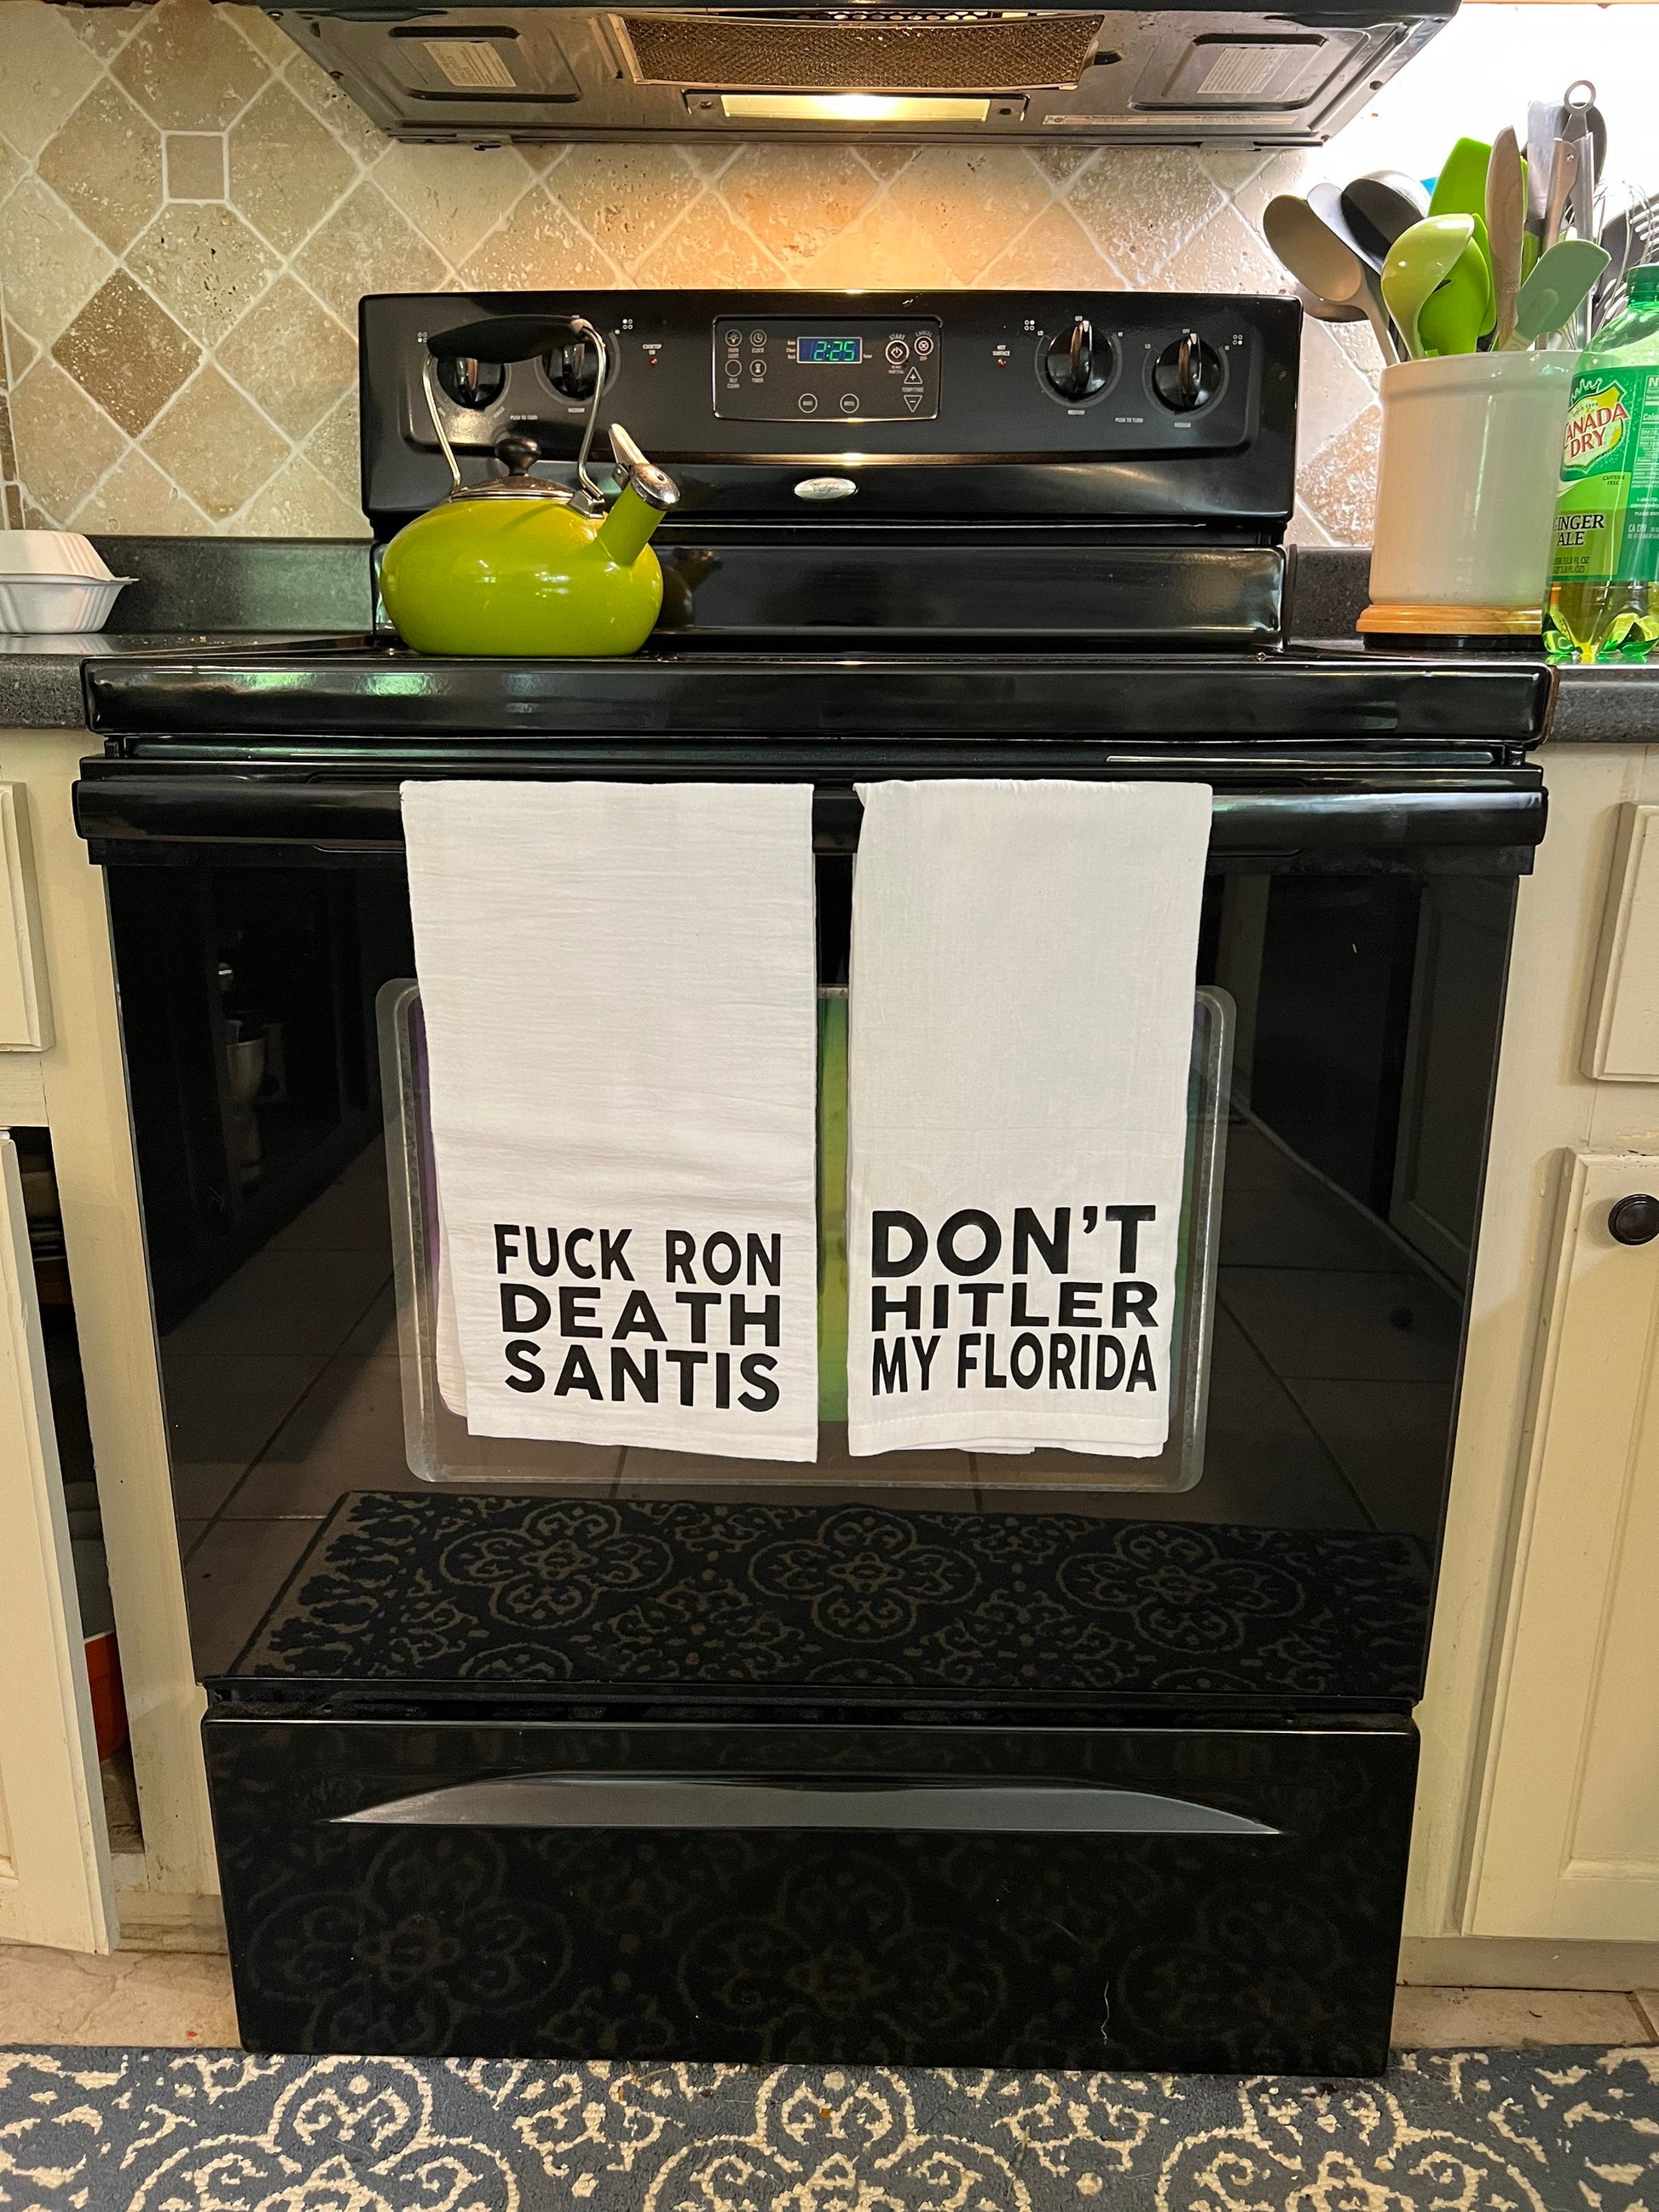 Don’t H!tler my Texas Fuck Greg Abbott Tea Towel Set - also available in DeSantis and Florida